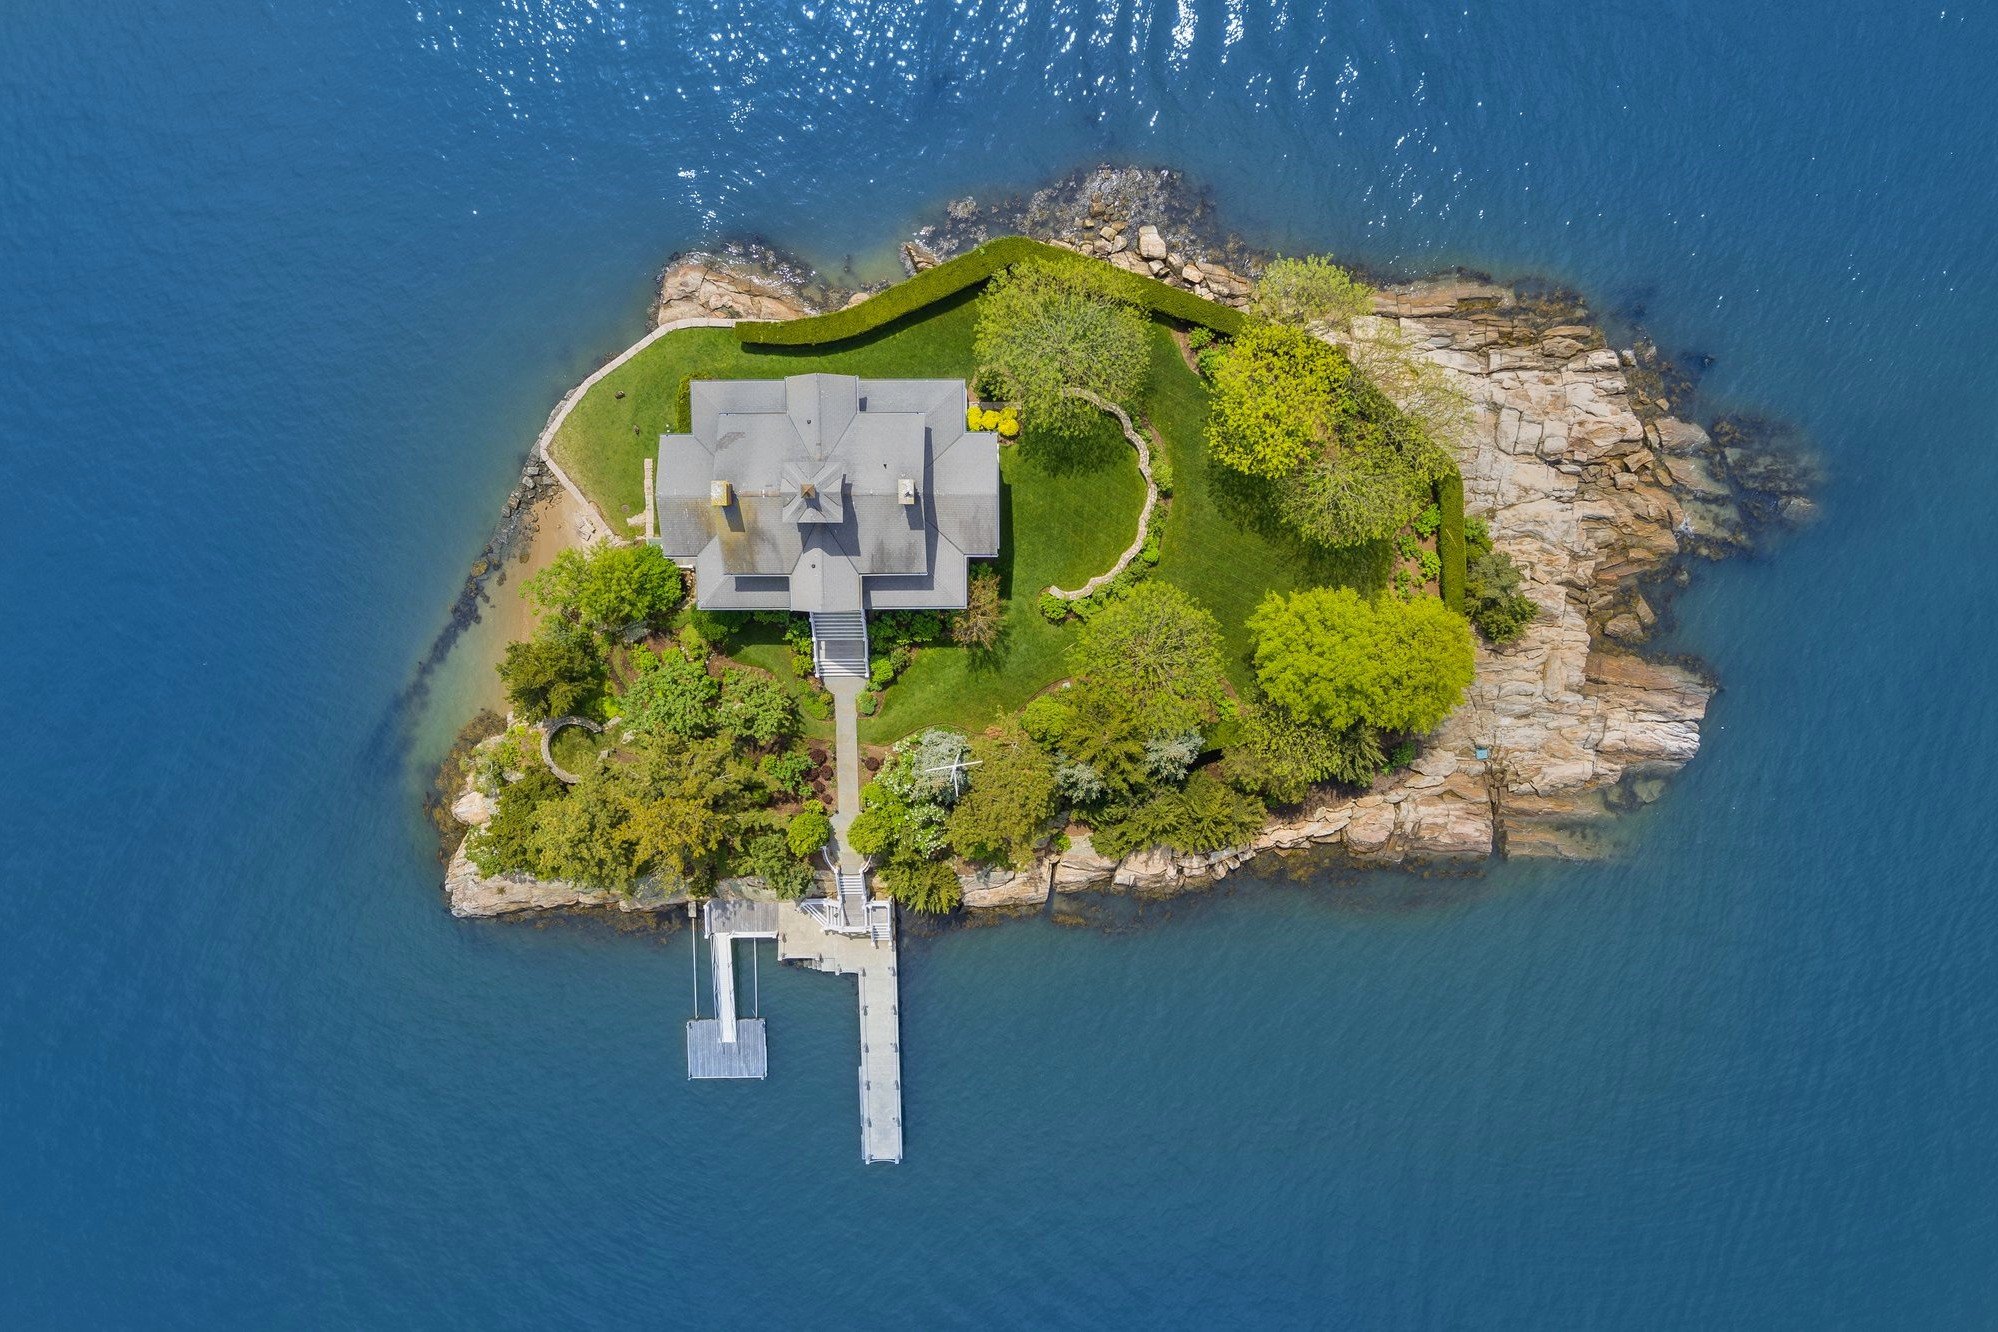 How Much Does a Private Island Cost? Top 22 Islands For Sale